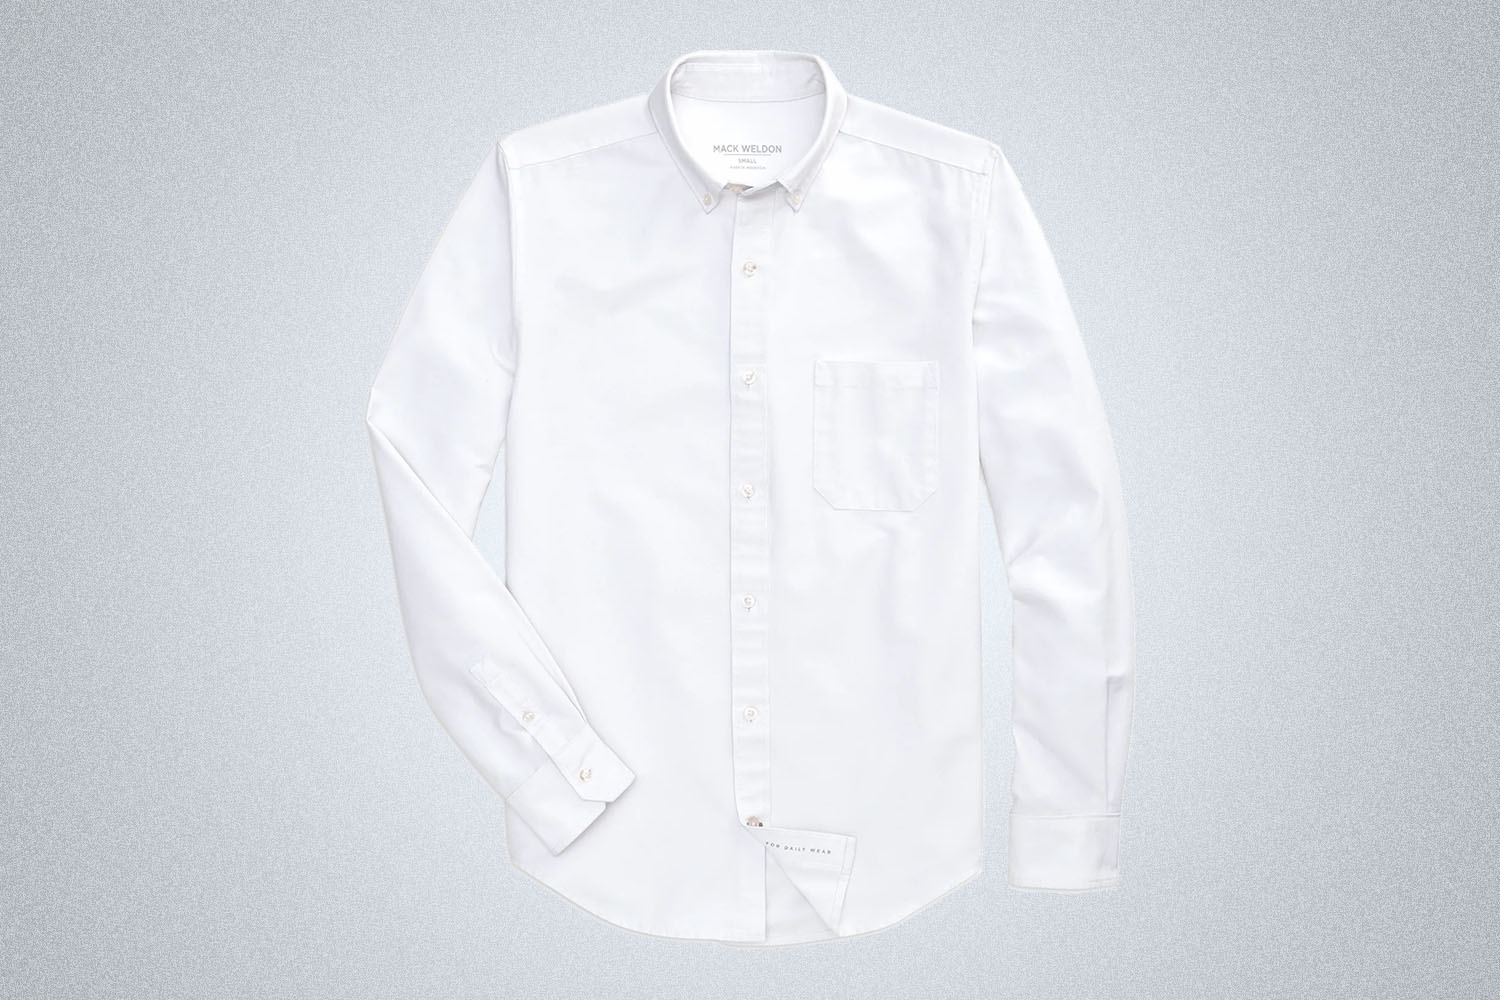 a white oxford shirt from Mack Weldon on a grey background